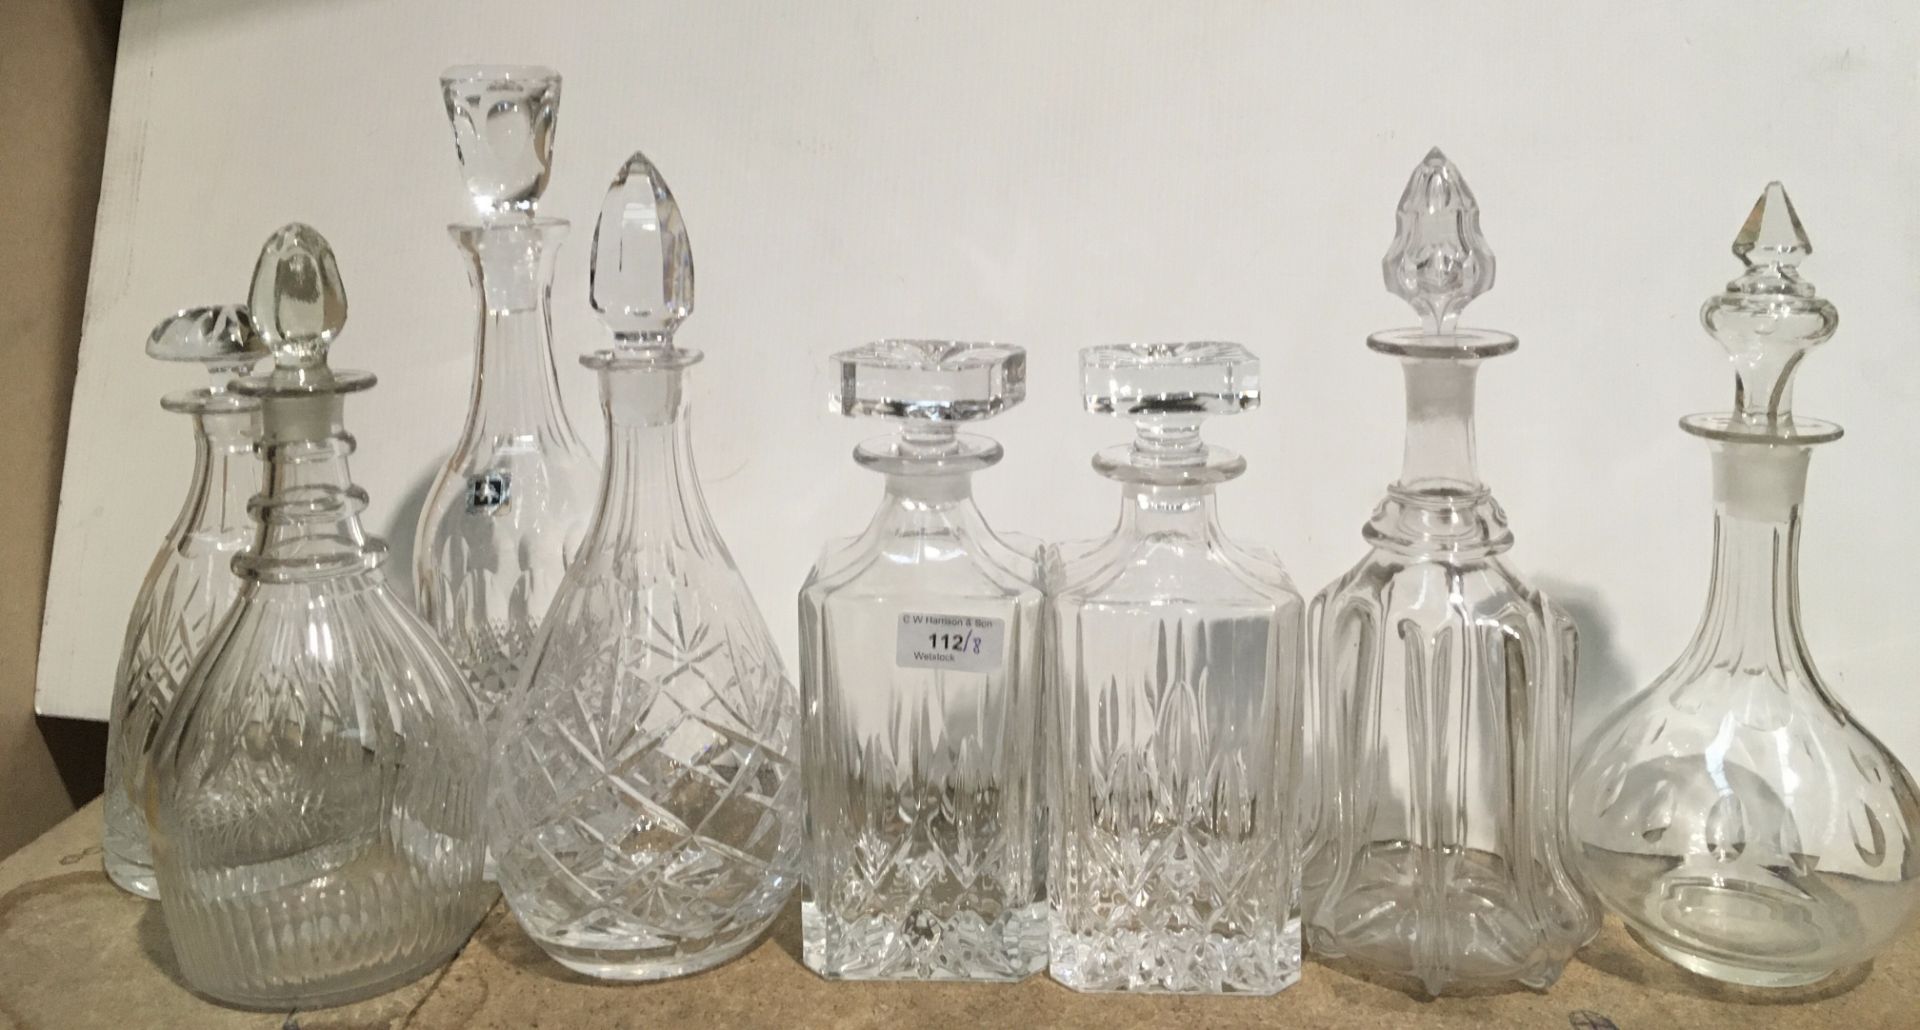 8 x various glass decanters